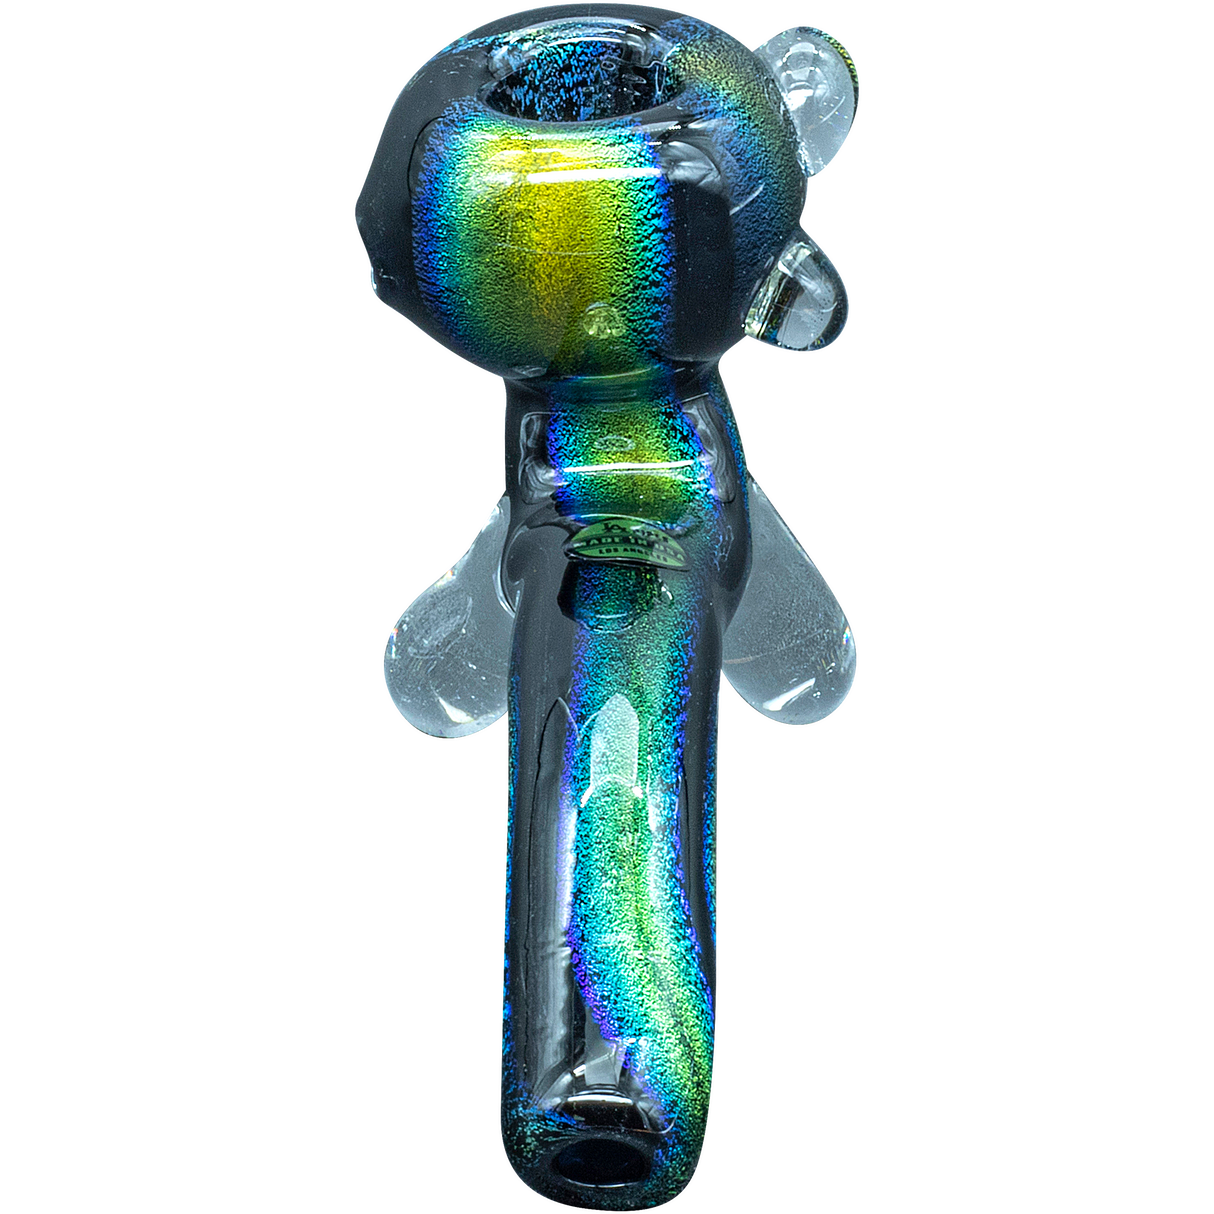 LA Pipes "The Galaxy" Dichroic Glass Sherlock Pipe, USA Made, Front View